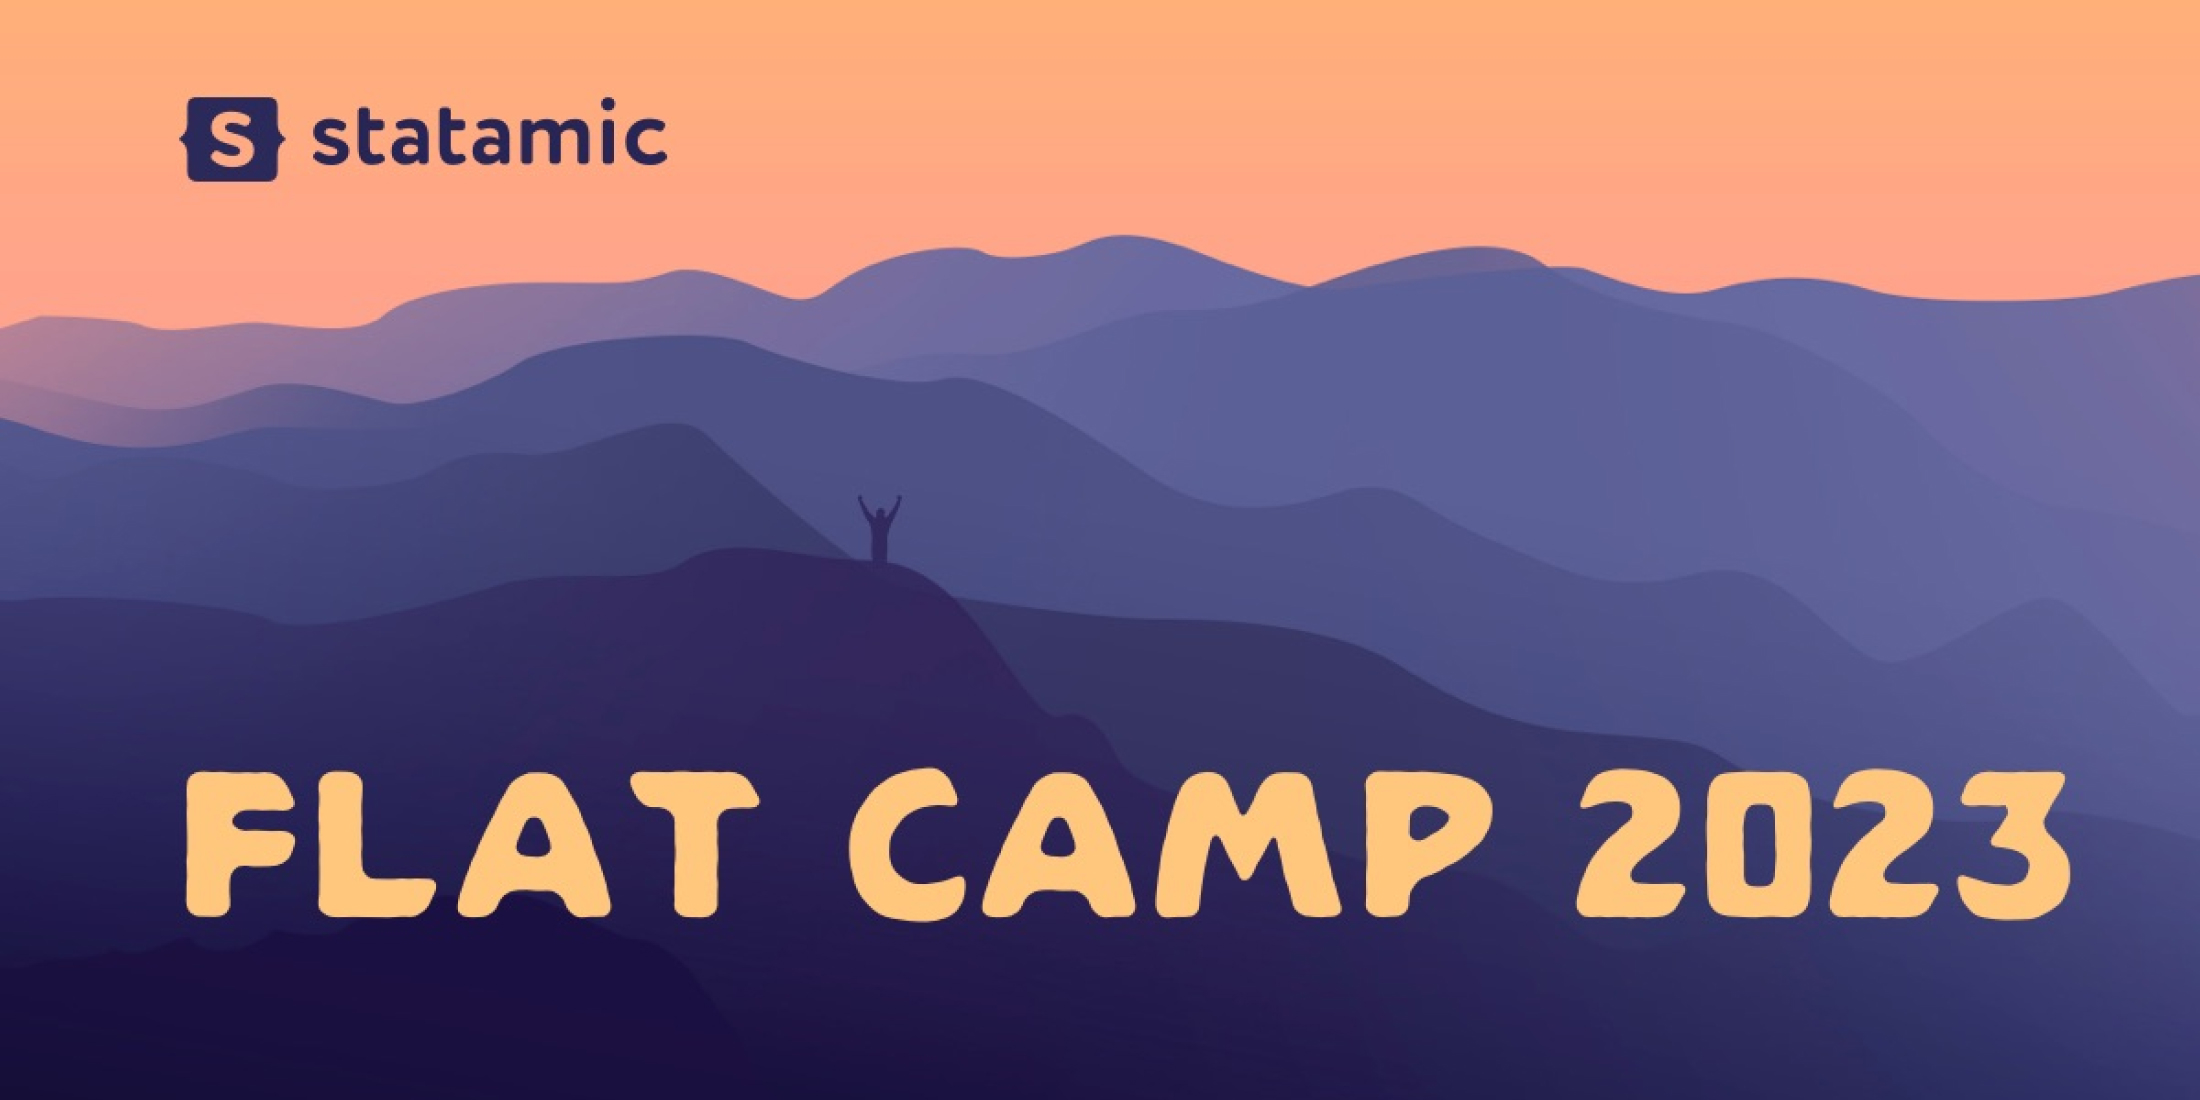 Statamic announces a new Flat Camp retreat image